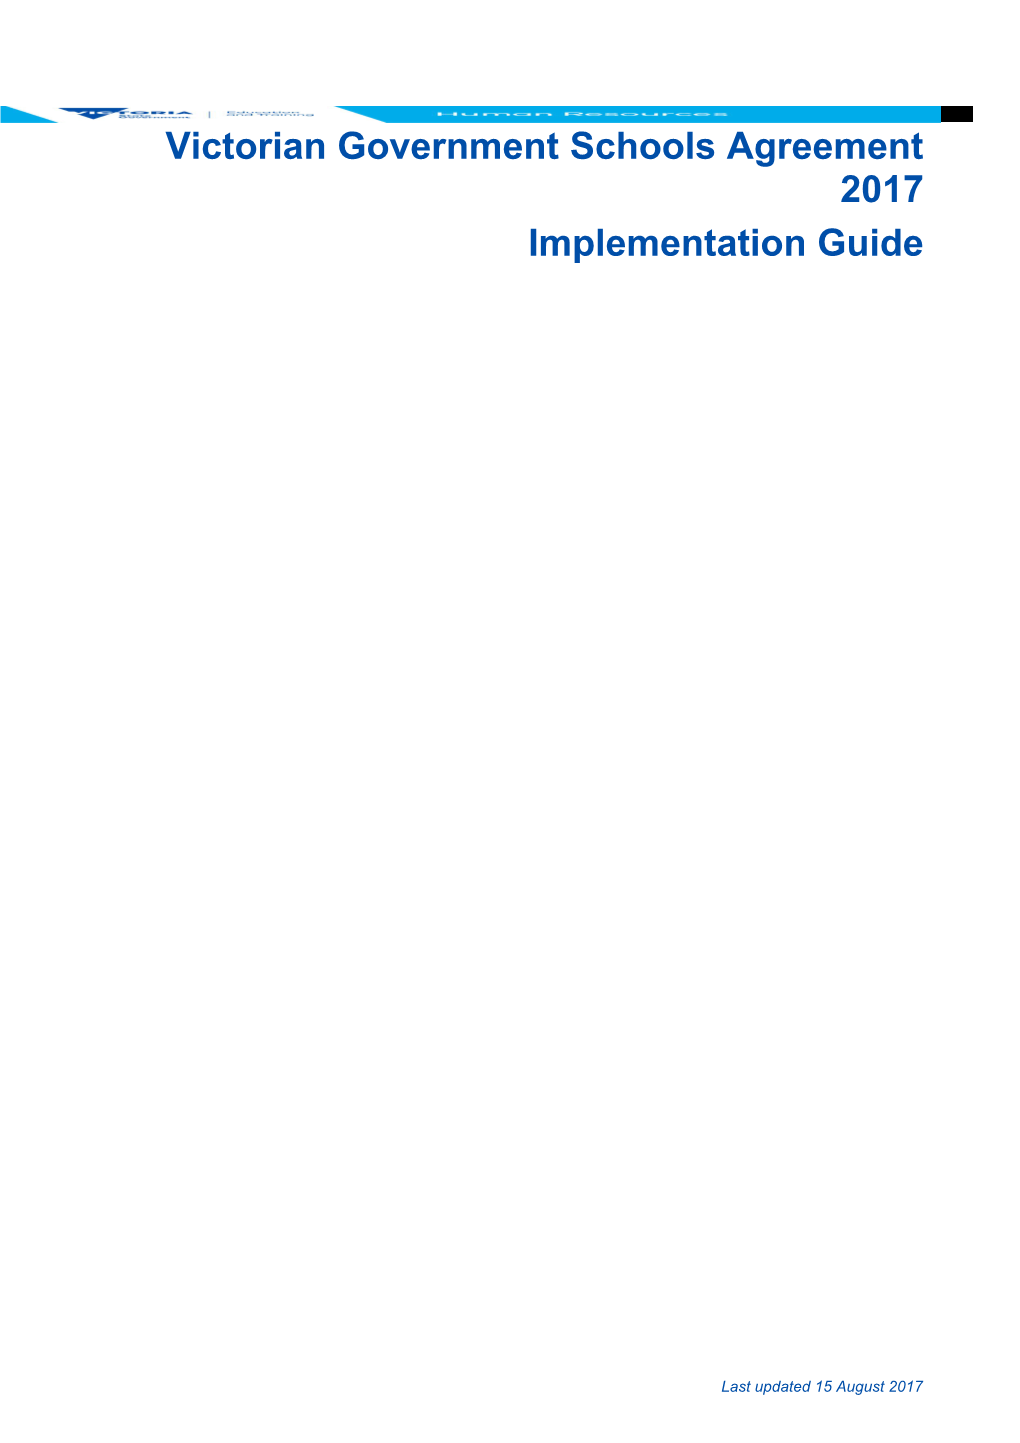 Victorian Government Schools Agreement 2017 Implementation Guide